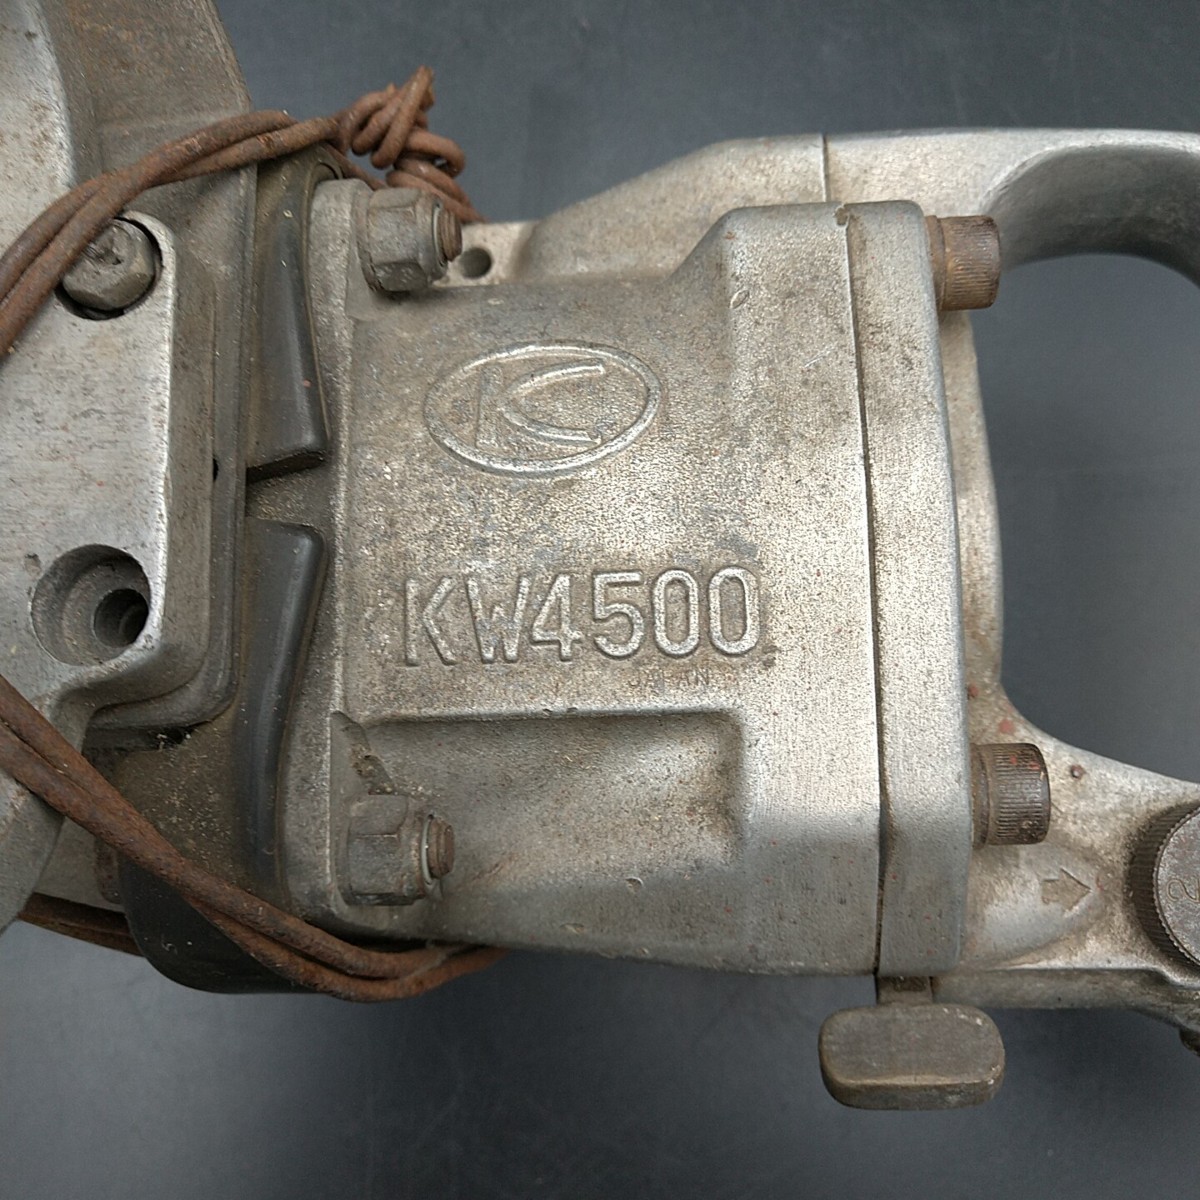 [100i118] air impact wrench KW4500 empty . large bus truck large wrench maintenance operation not yet verification 